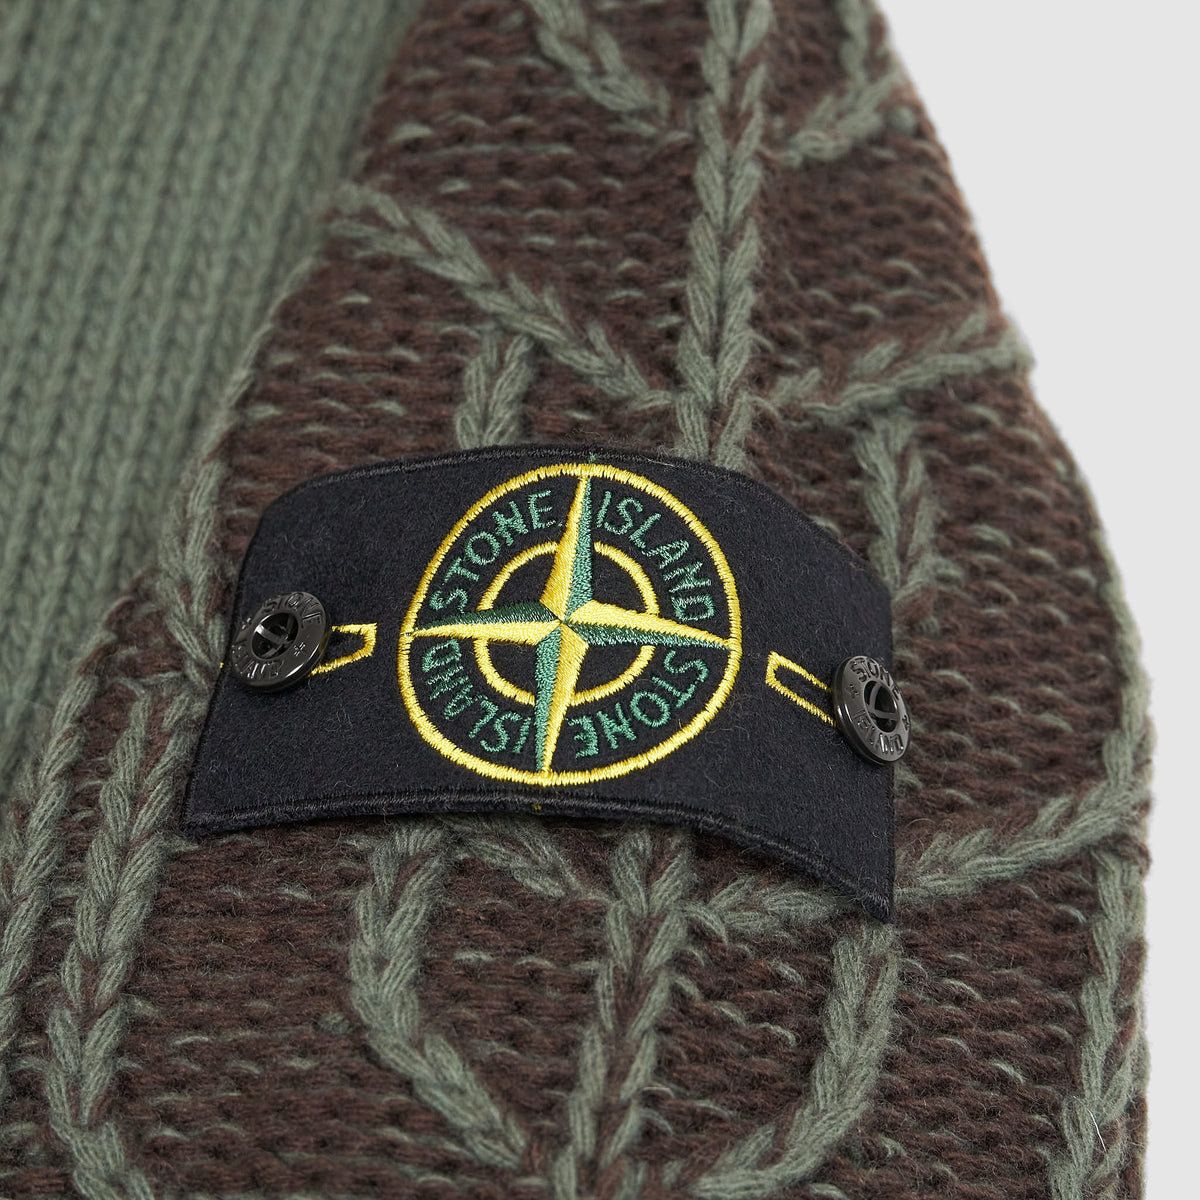 Stone Island Cable Knit Pullover